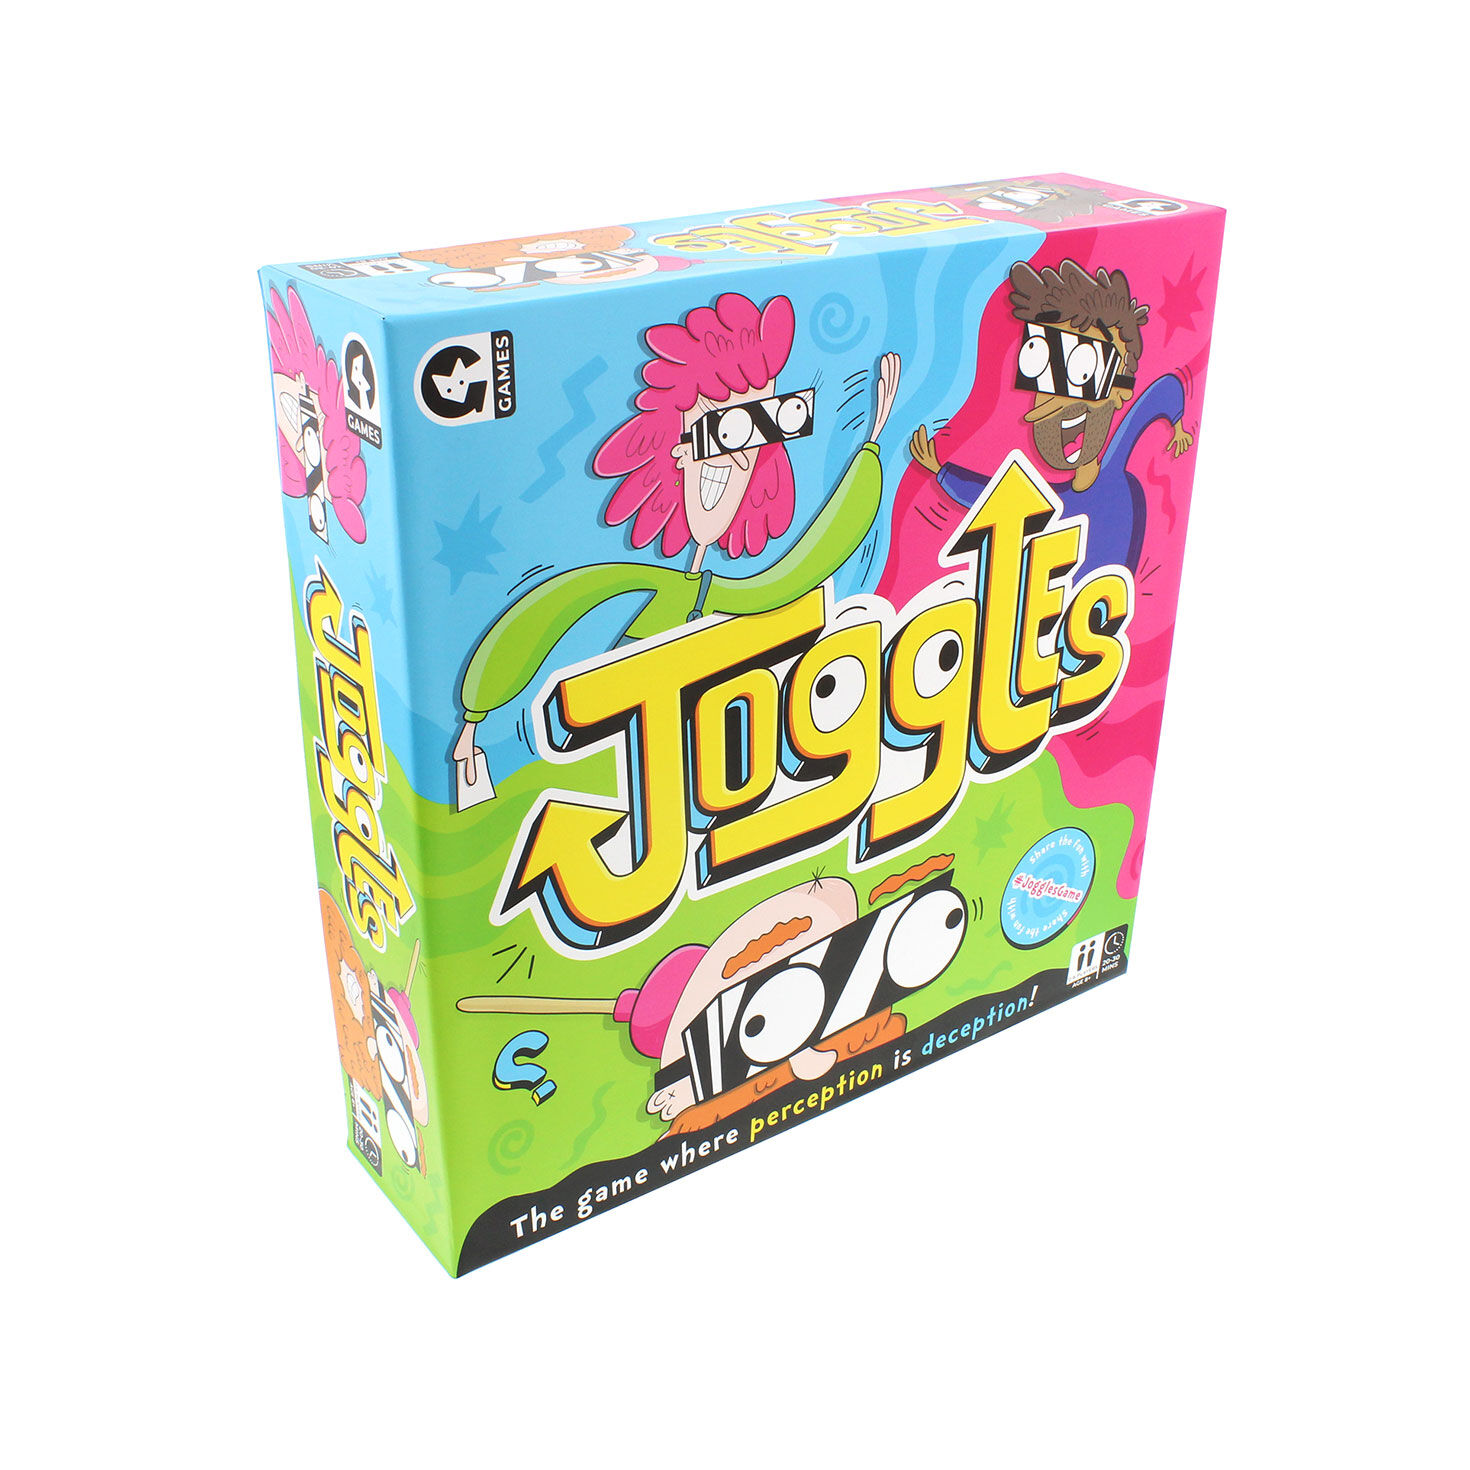 Joggles Game for only USD 24.95 | Hallmark